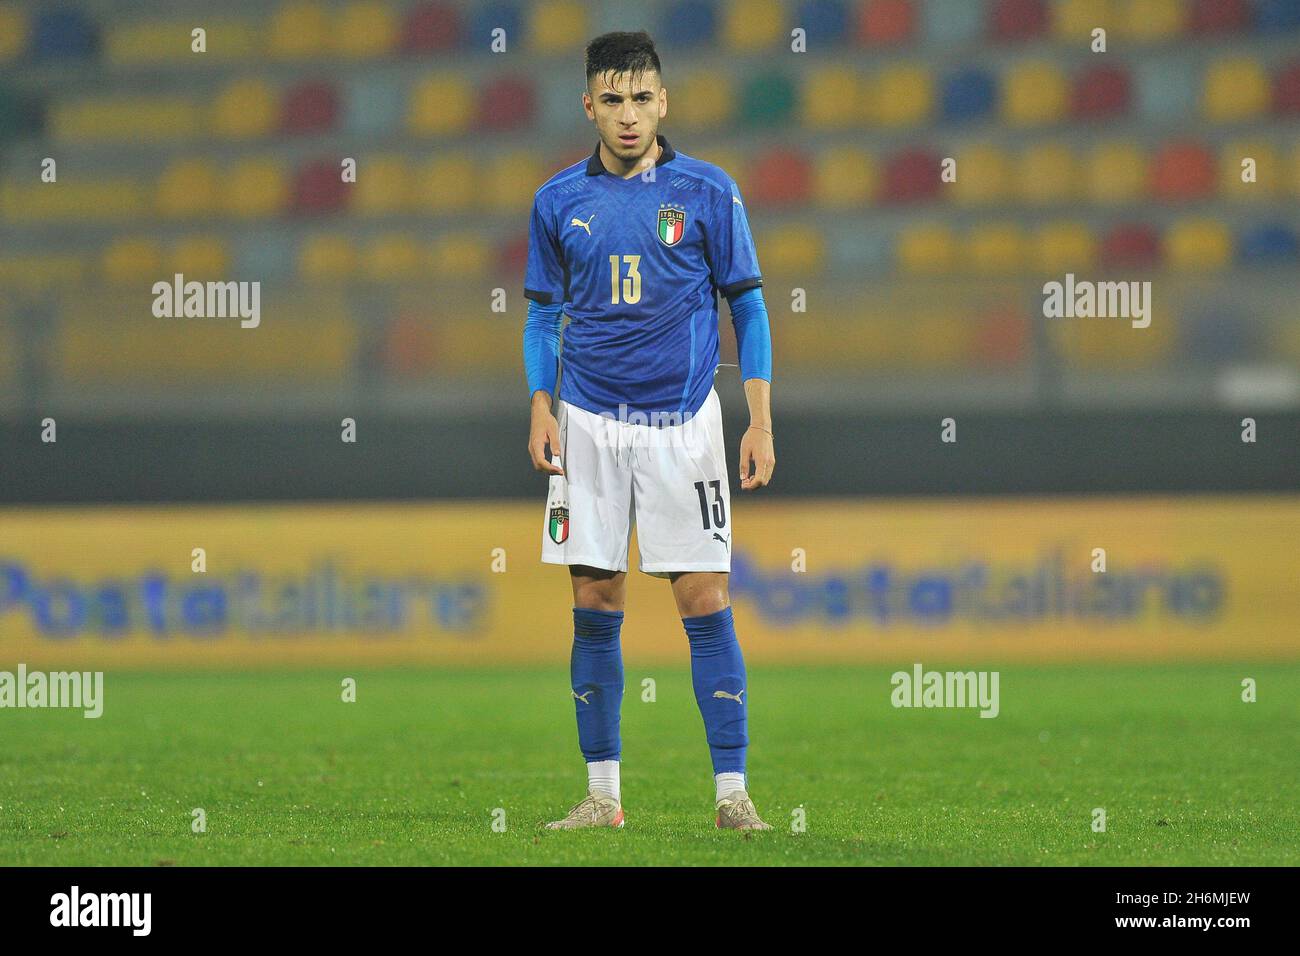 Frosinone, Italy. 16th Nov, 2021. Fabiano Parisi Italy U21 player, during the friendly match between Italy vs Romania final result 4-2, match played at the Benito Stirpe stadium in Frosinone. Frosinone, Italy, November 16, 2021. (photo by Vincenzo Izzo/Sipa USA) Credit: Sipa USA/Alamy Live News Stock Photo